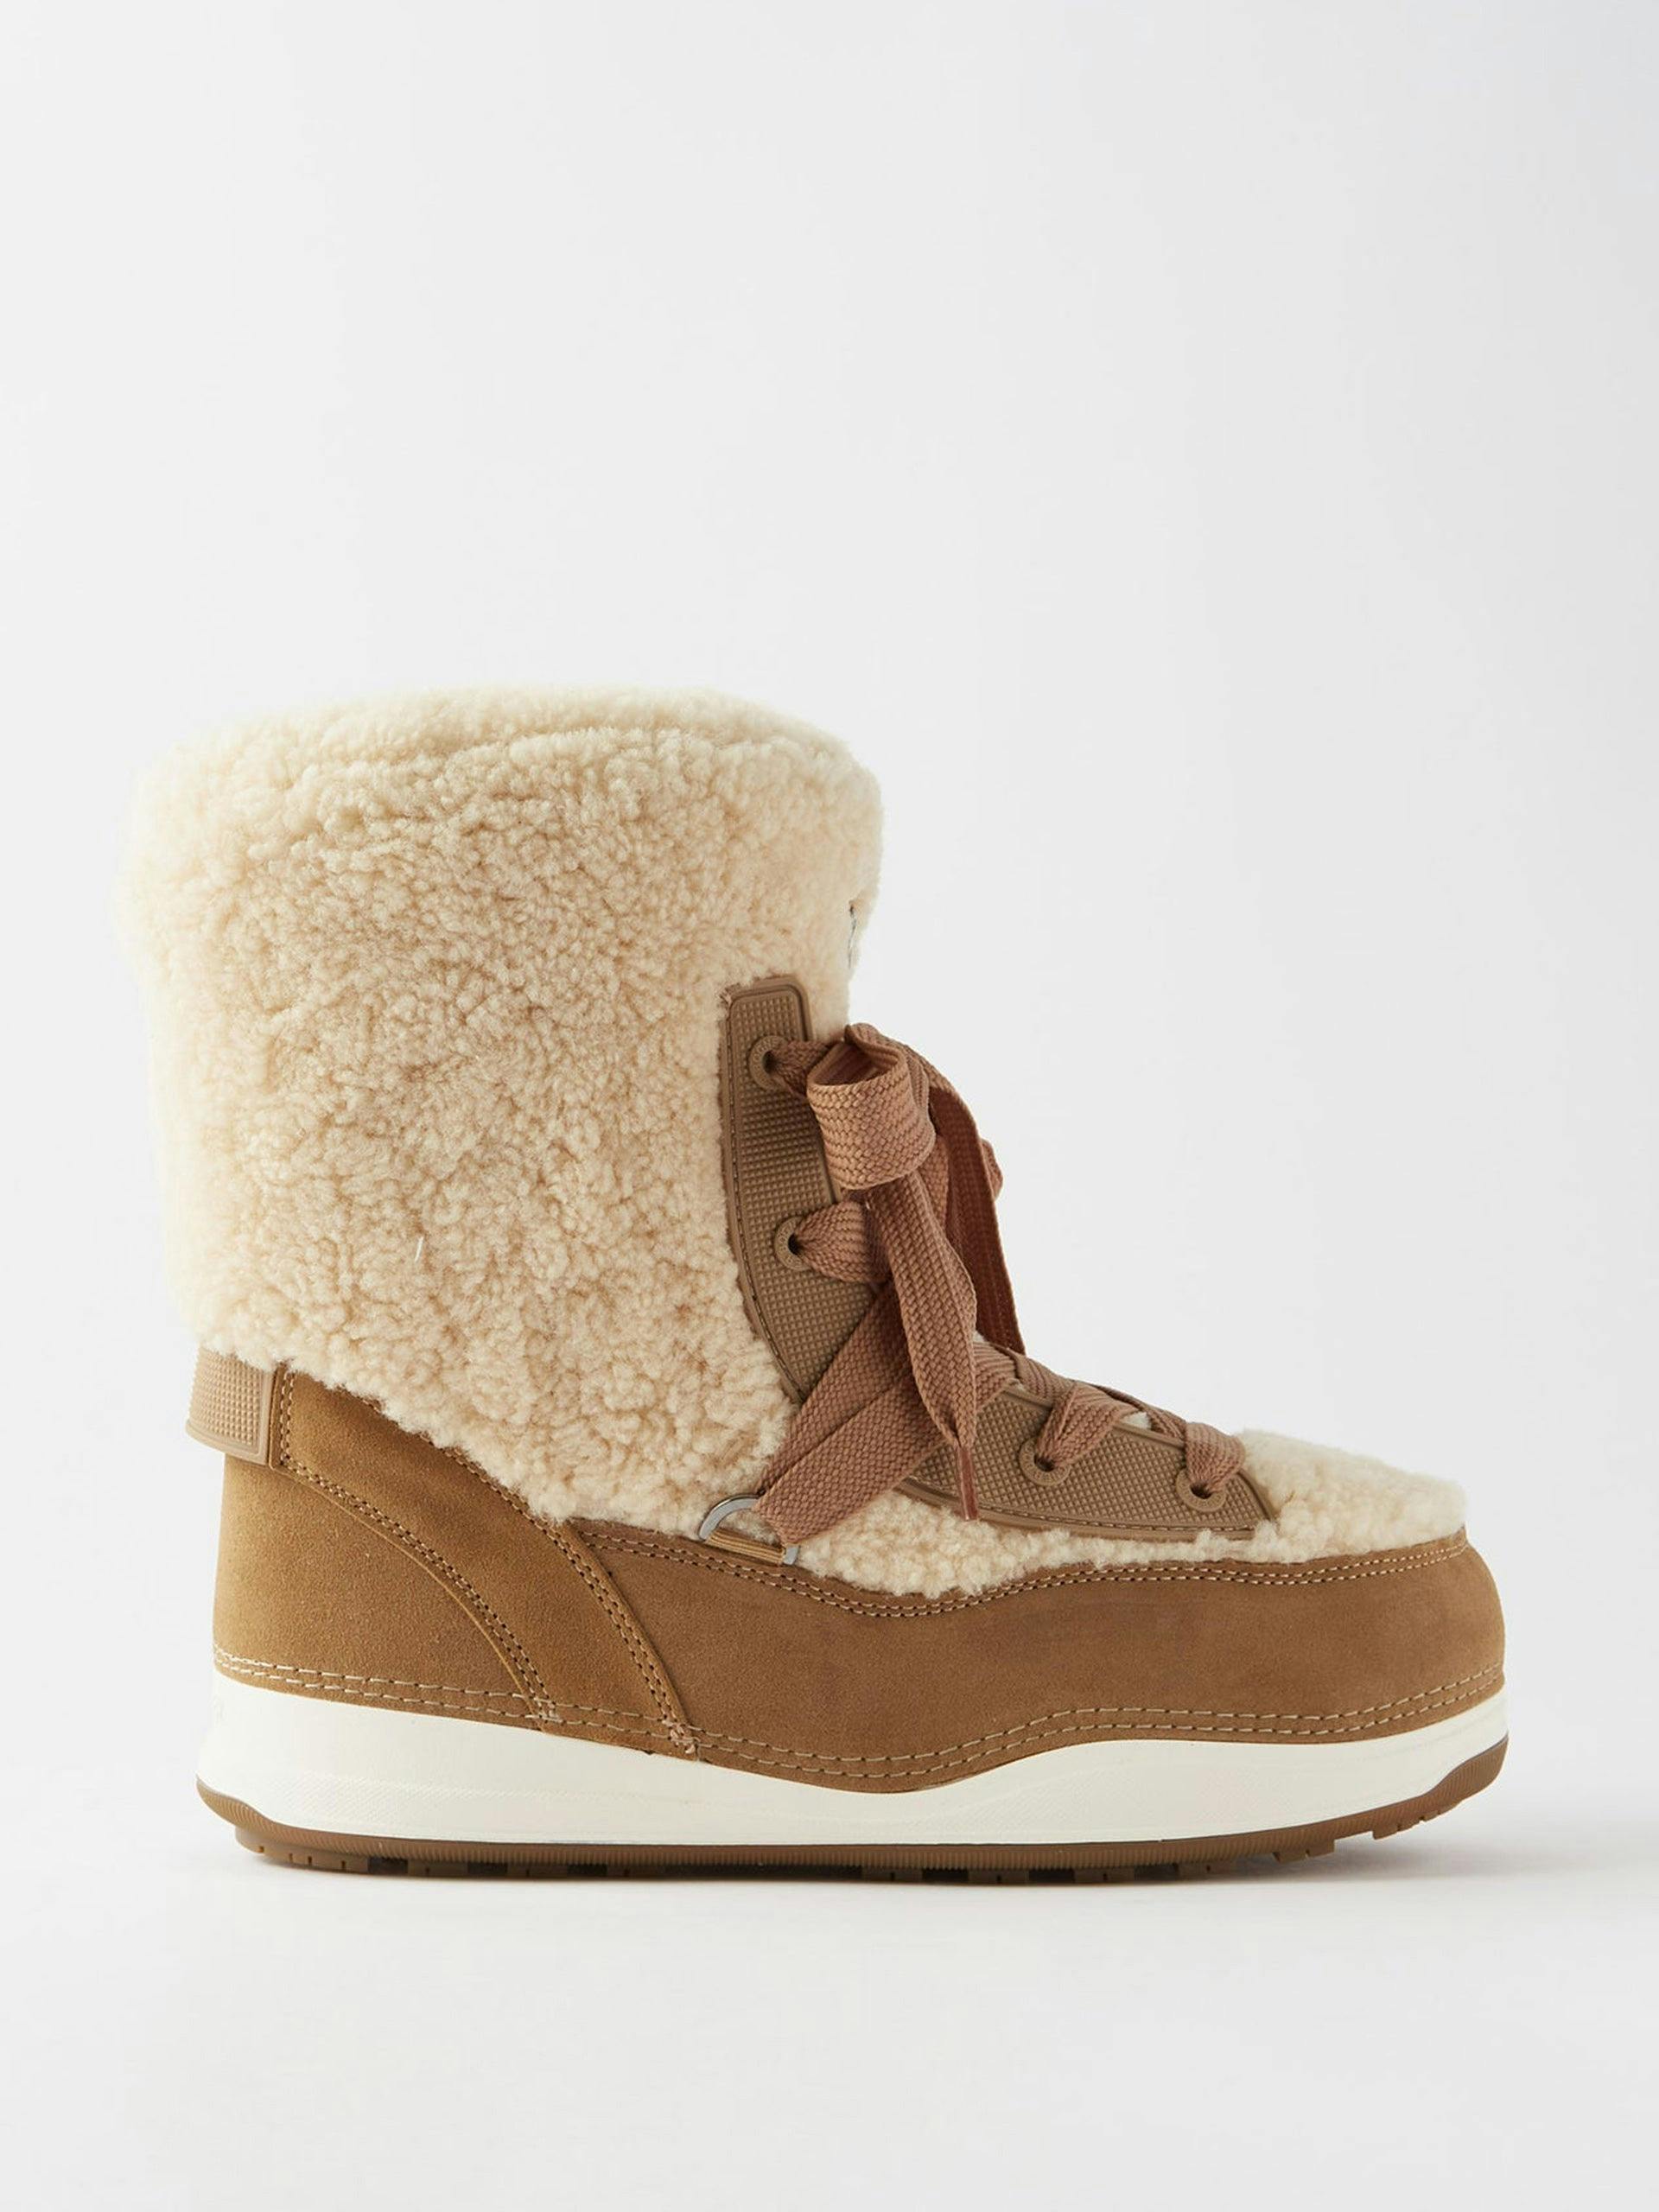 Shearling snow boots